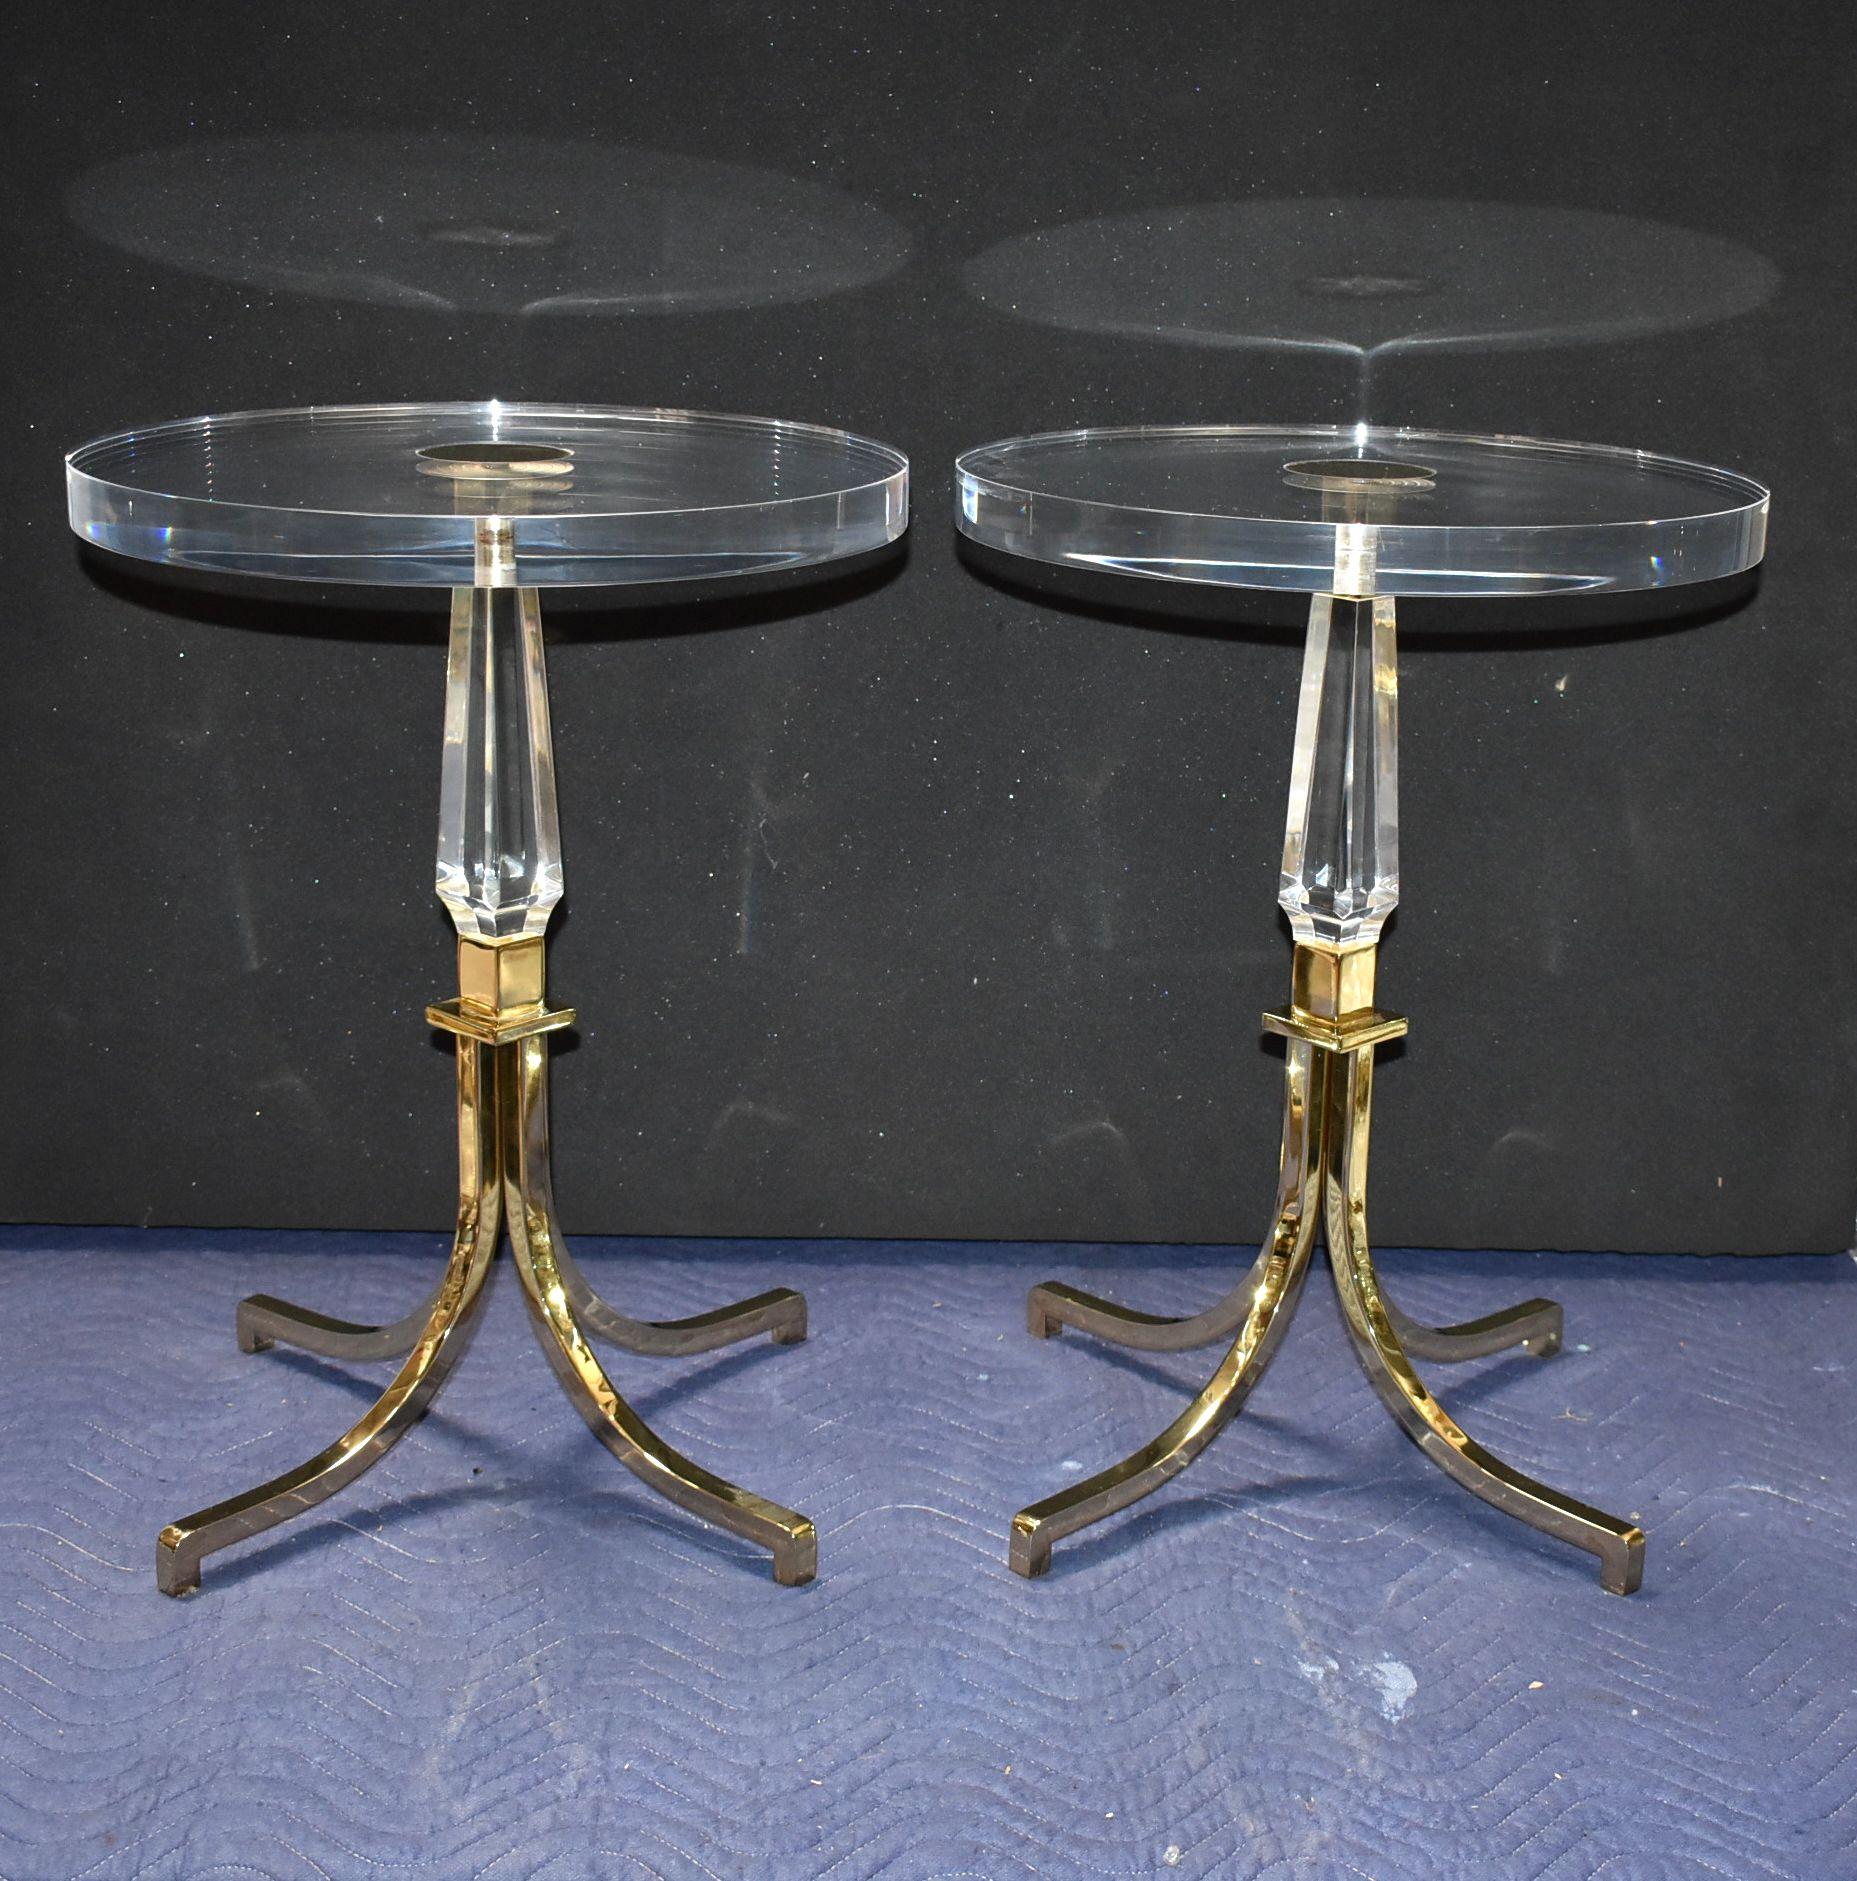 Pair of Regency style round side tables designed and signed by Charles Hollis Jones.

Provenance directly from CHJ